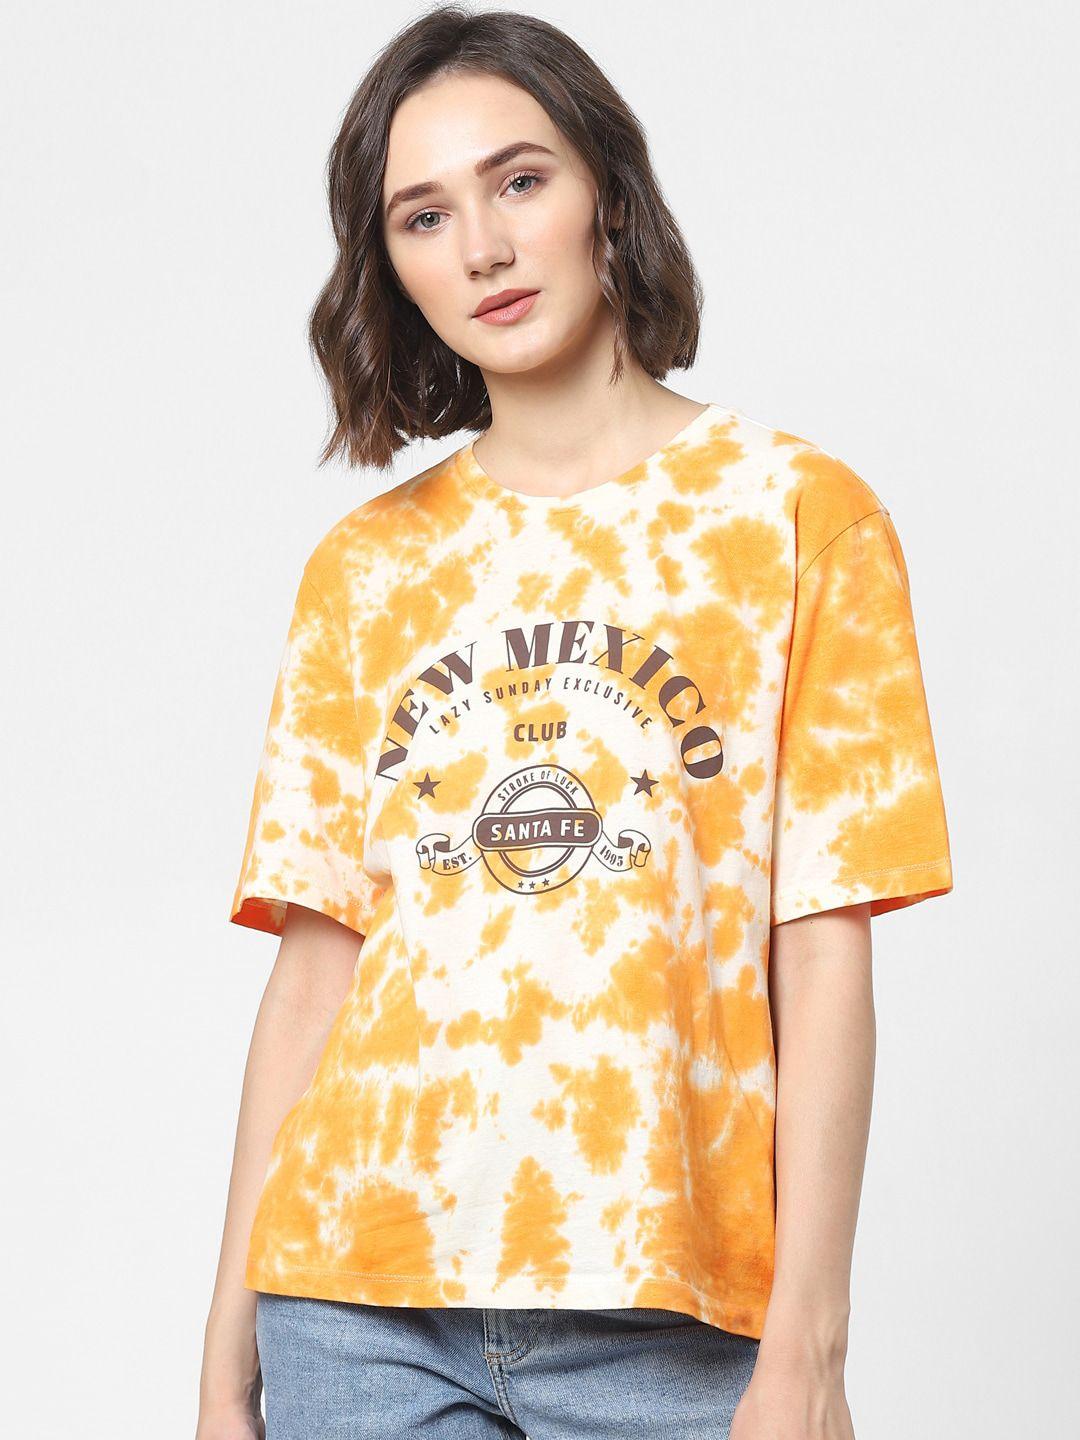 ONLY Women White & Yellow Graphic Printed Cotton Regular Fit T-shirt